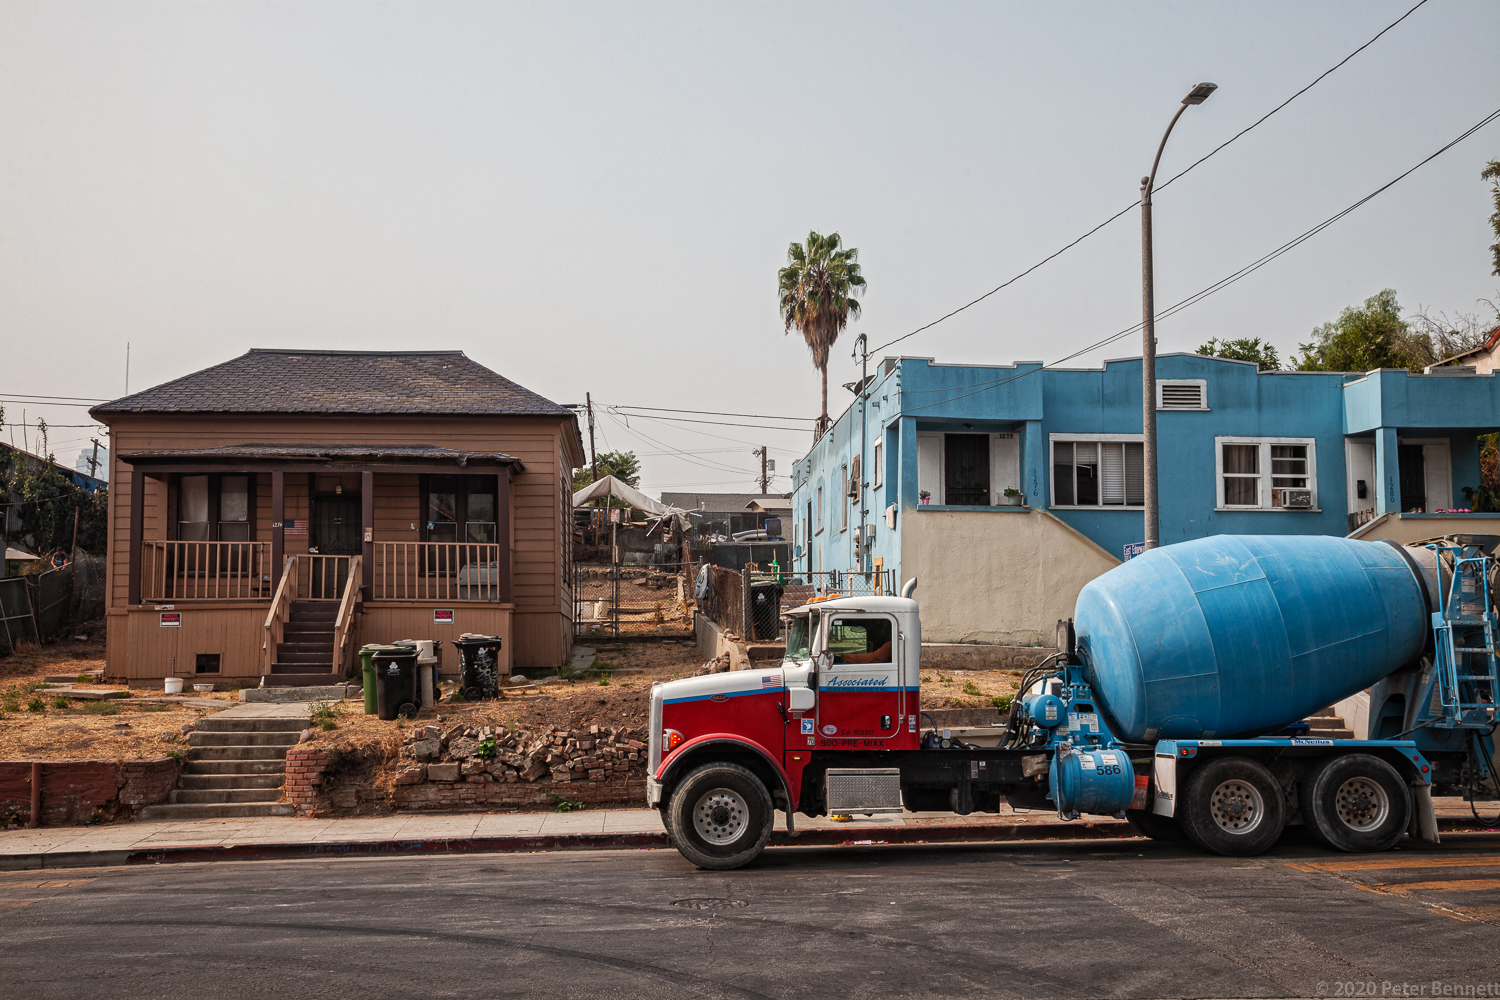 Cement mixer trucks line up in front of a home once surrounded by oil wells, to deliver their load to a construction site on Court Street.